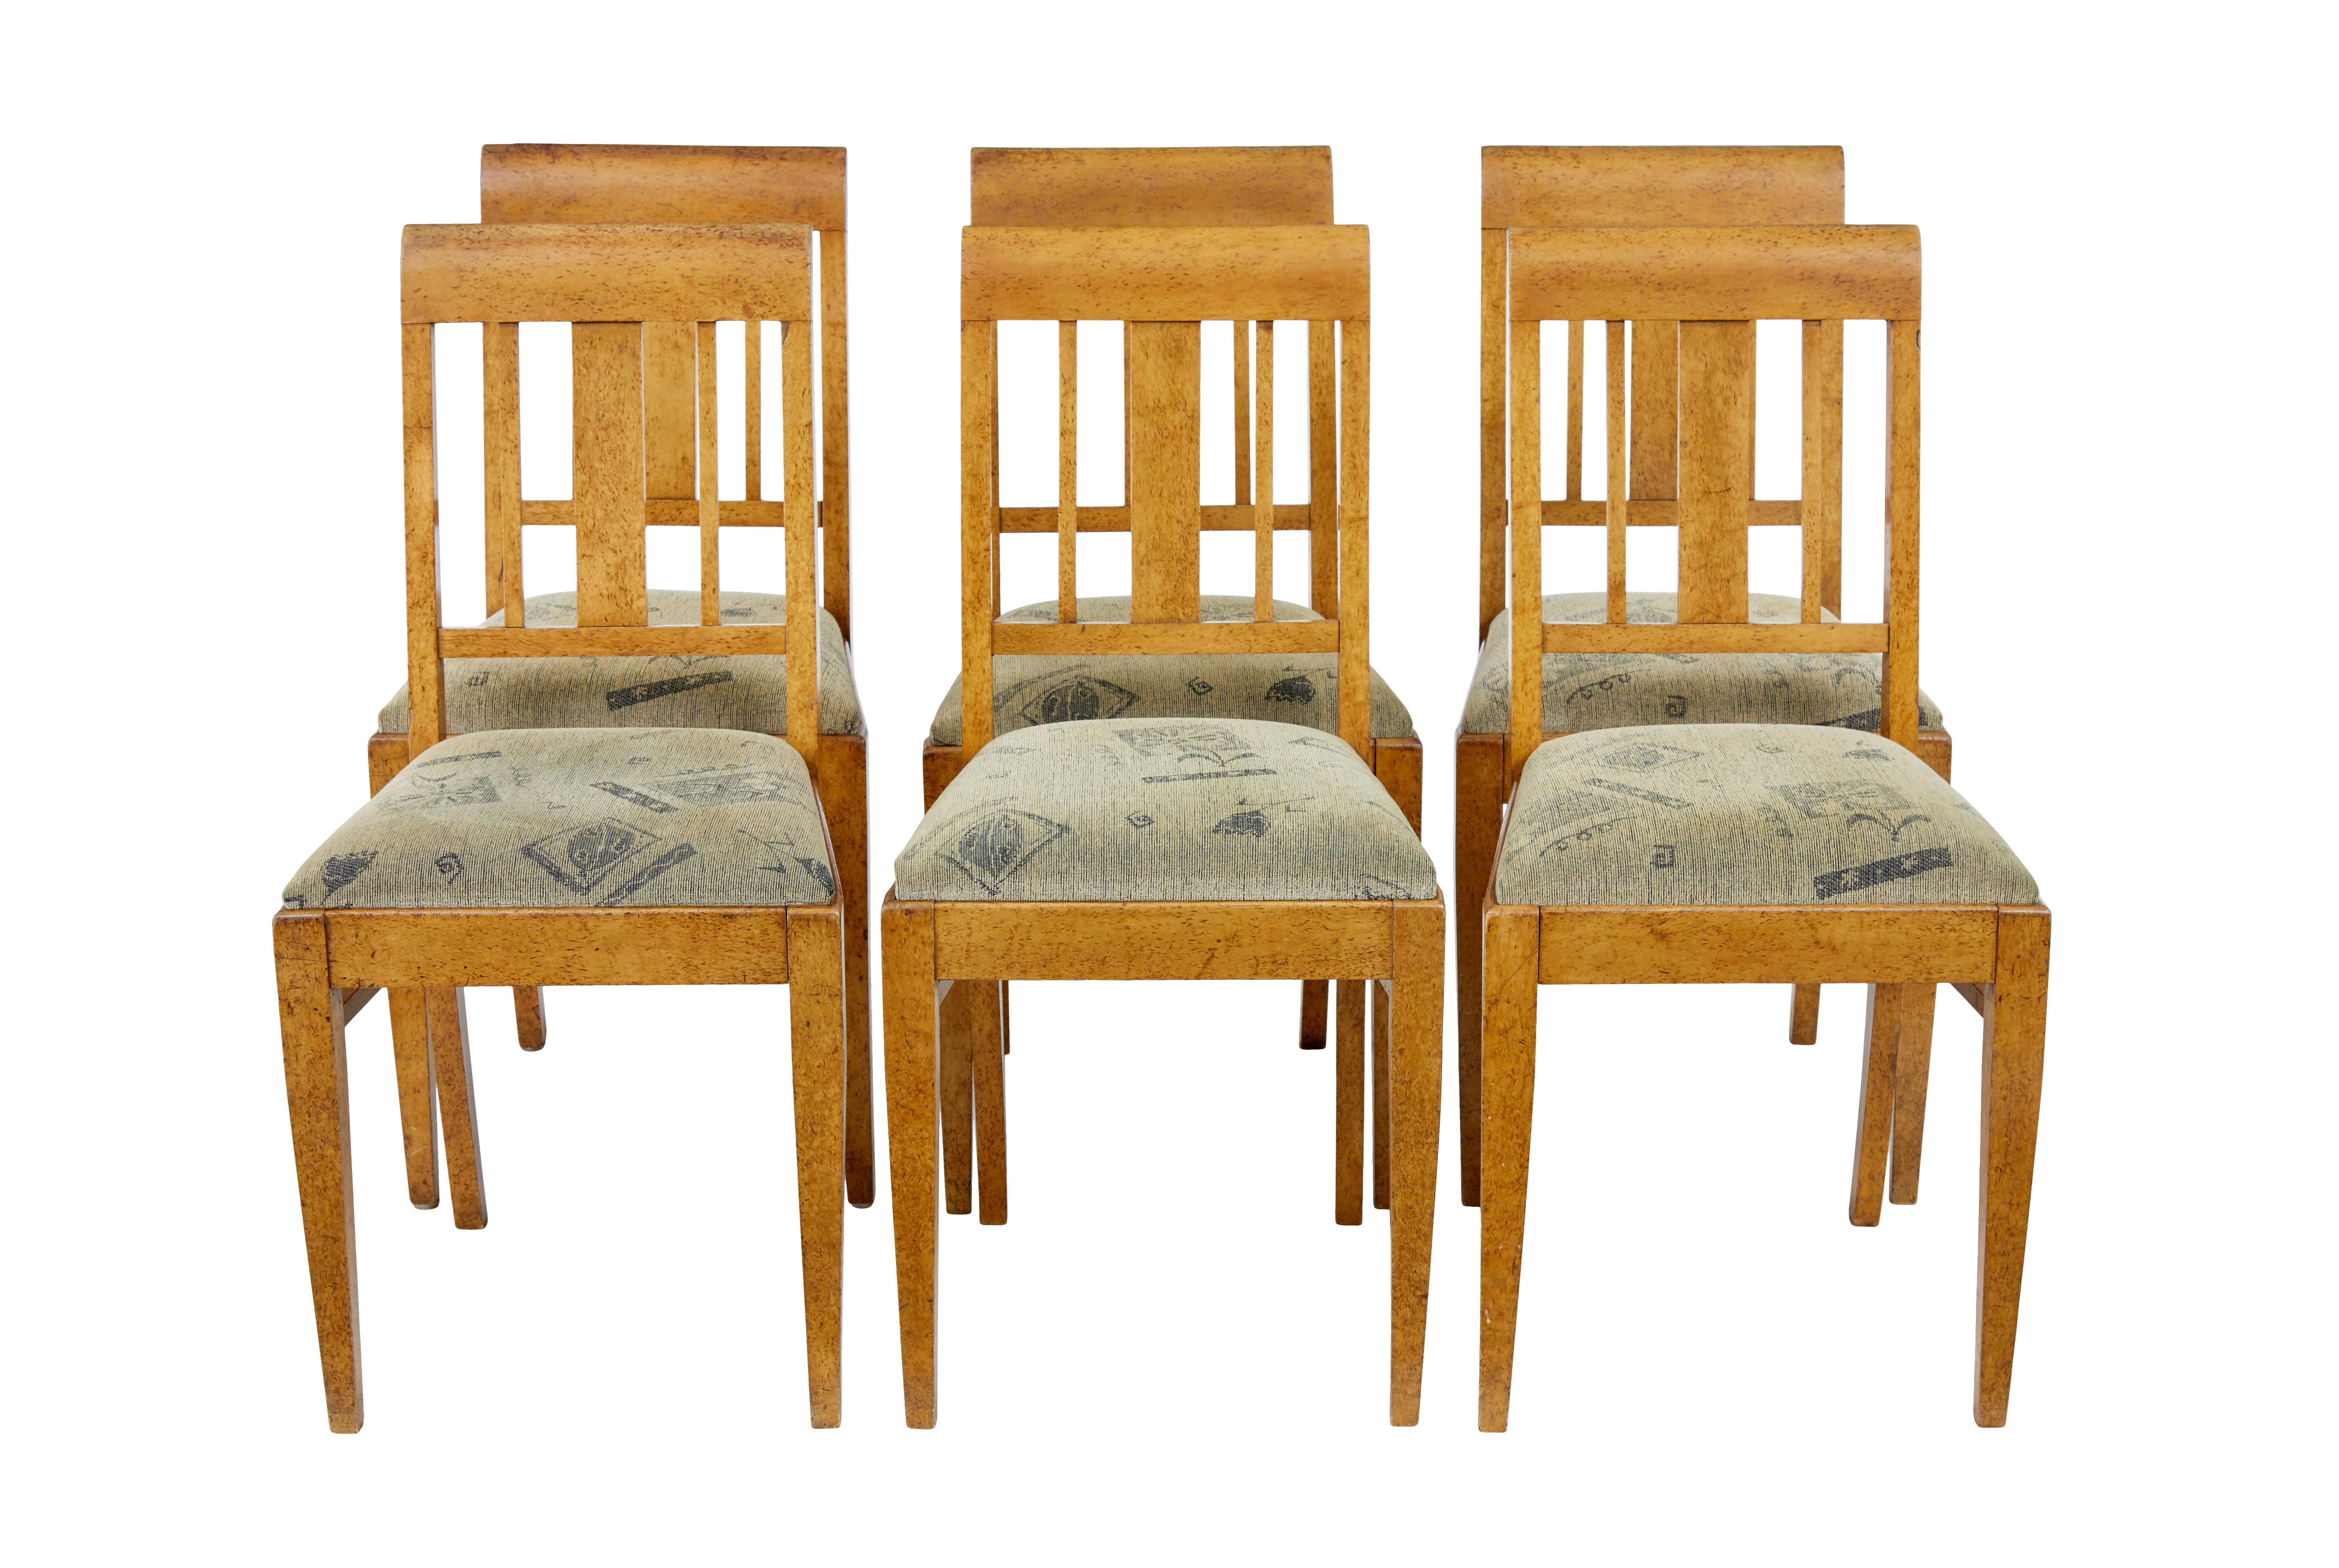 Late 19th century 7 piece burr birch living room suite For Sale 1